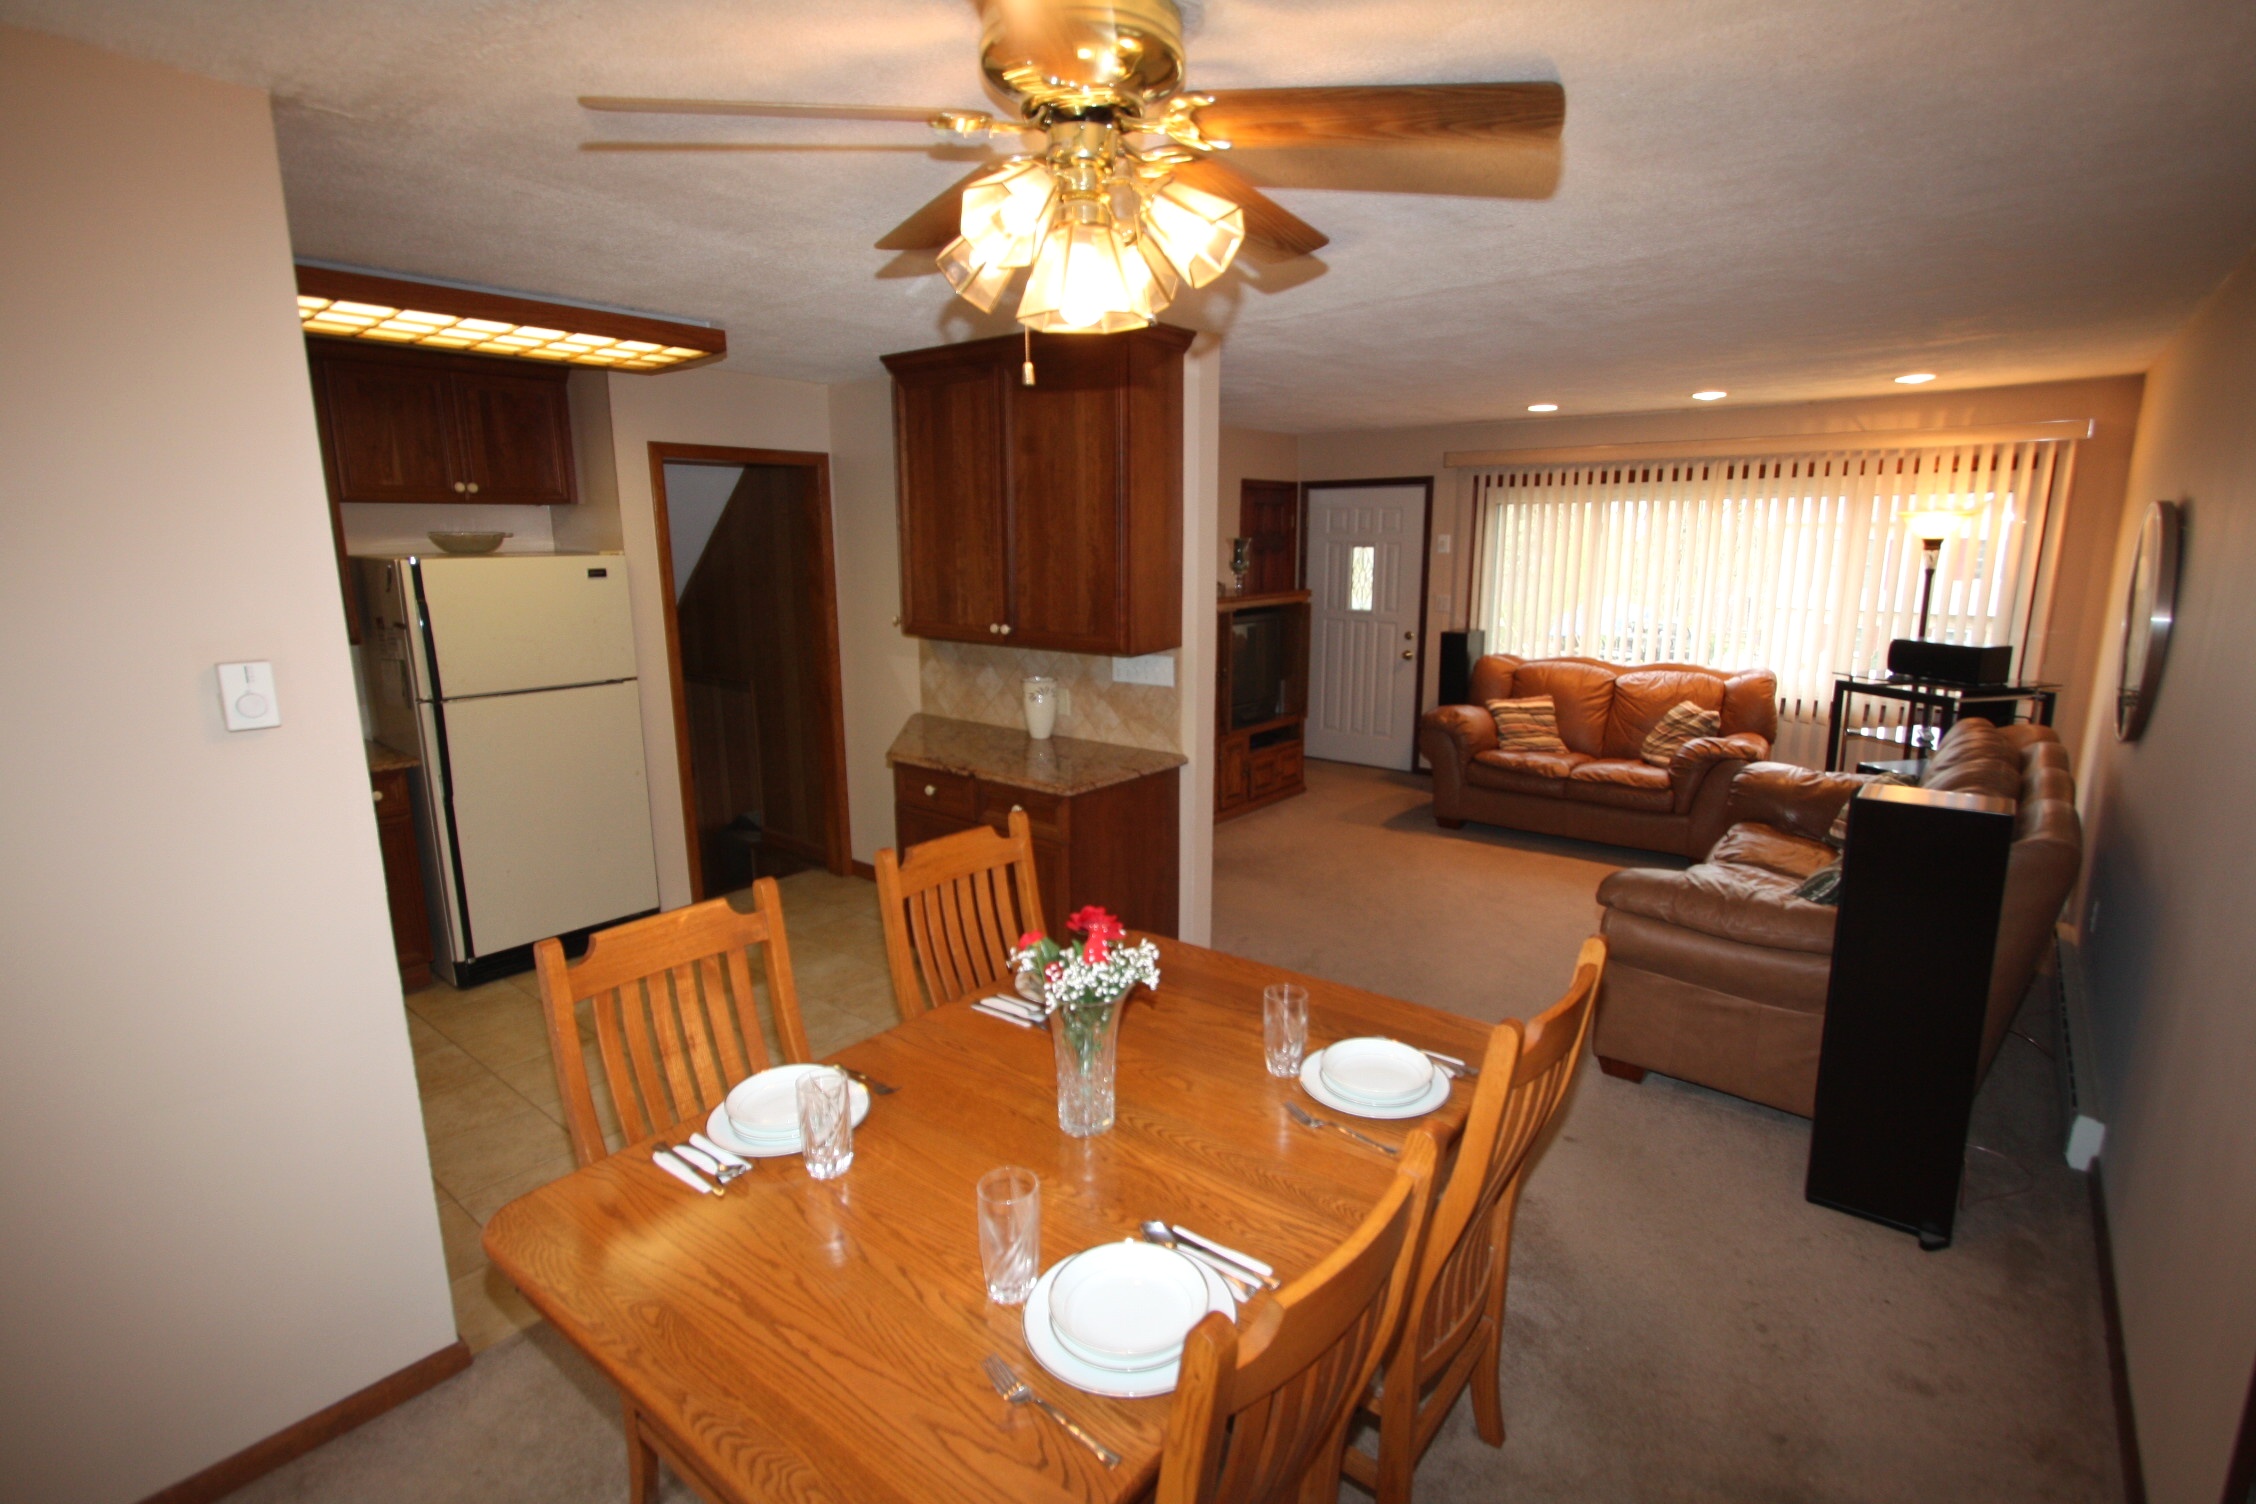 Ceiling Fans Over Dining Room Table